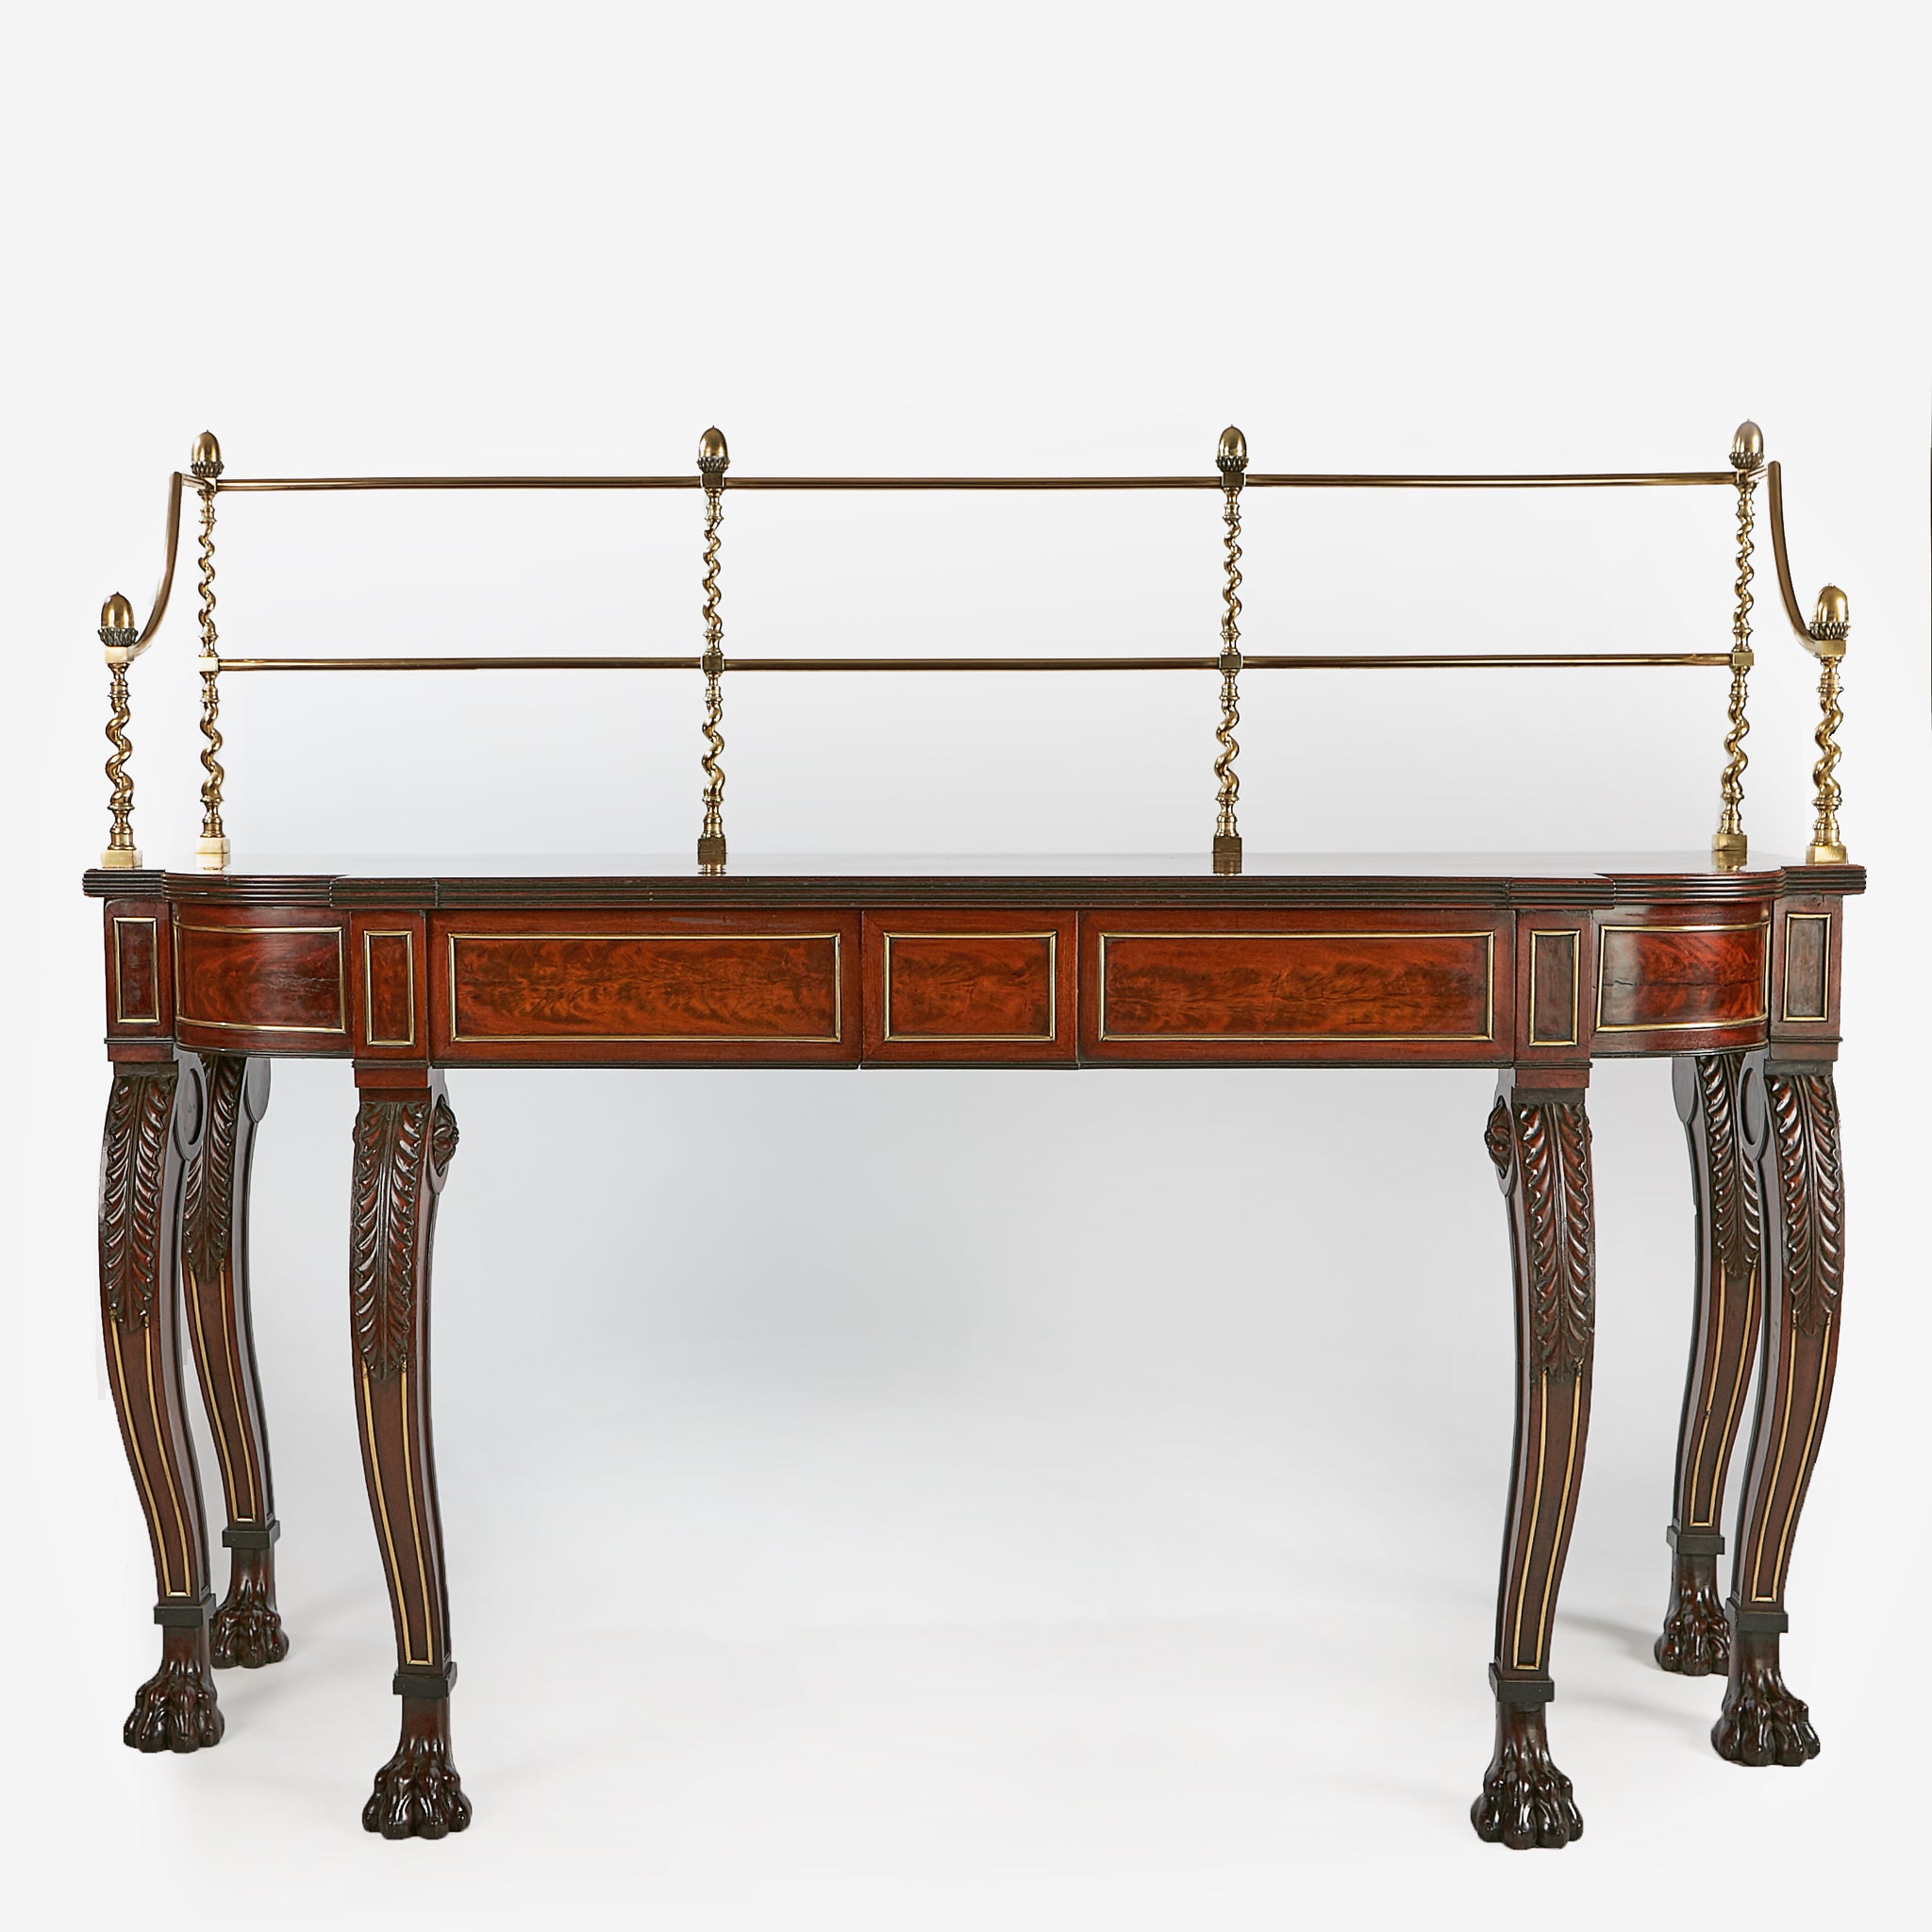 AN EXCEPTIONAL REGENCY SERVING / CONSOLE TABLE - REF No. 5006